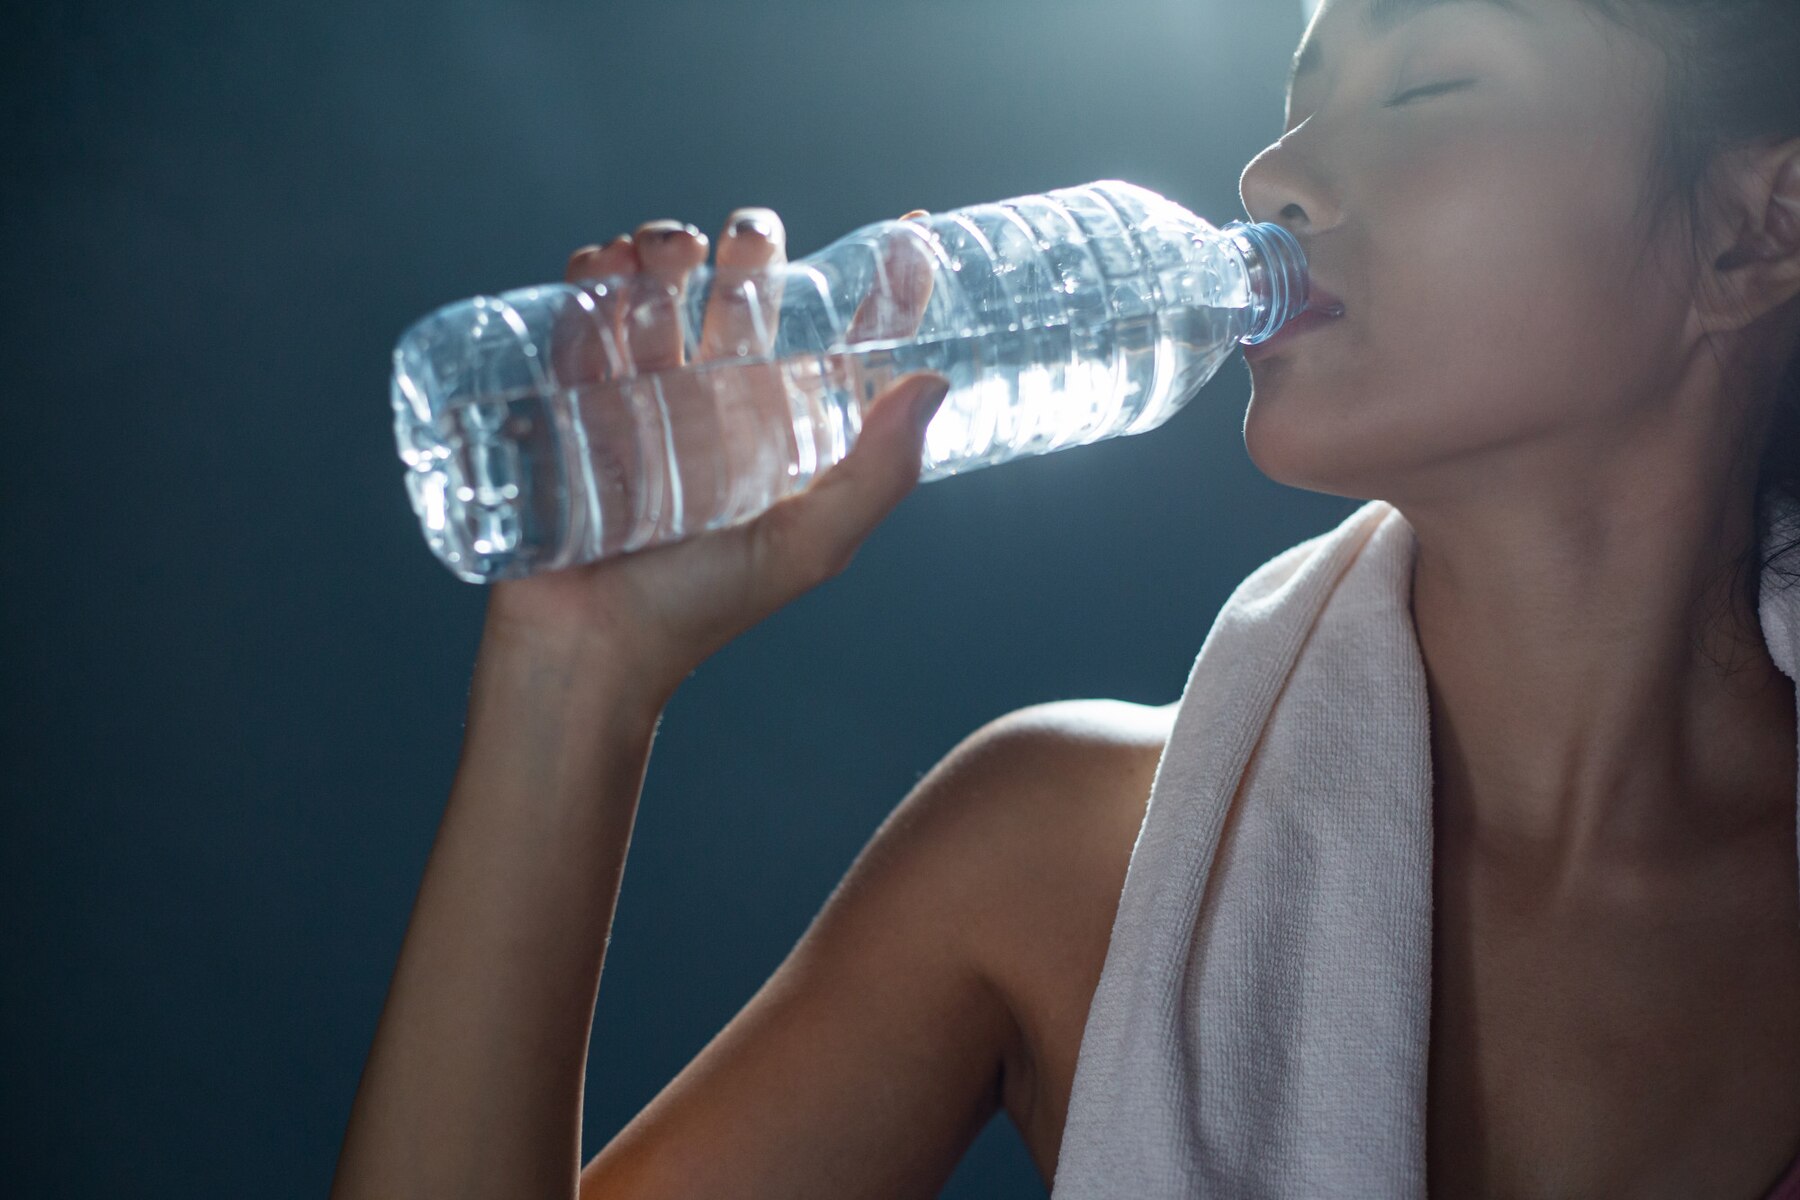 women-after-exercise-drink-water-from-bottles-and-handkerchiefs-in-the-gym_1150-16573.jpg